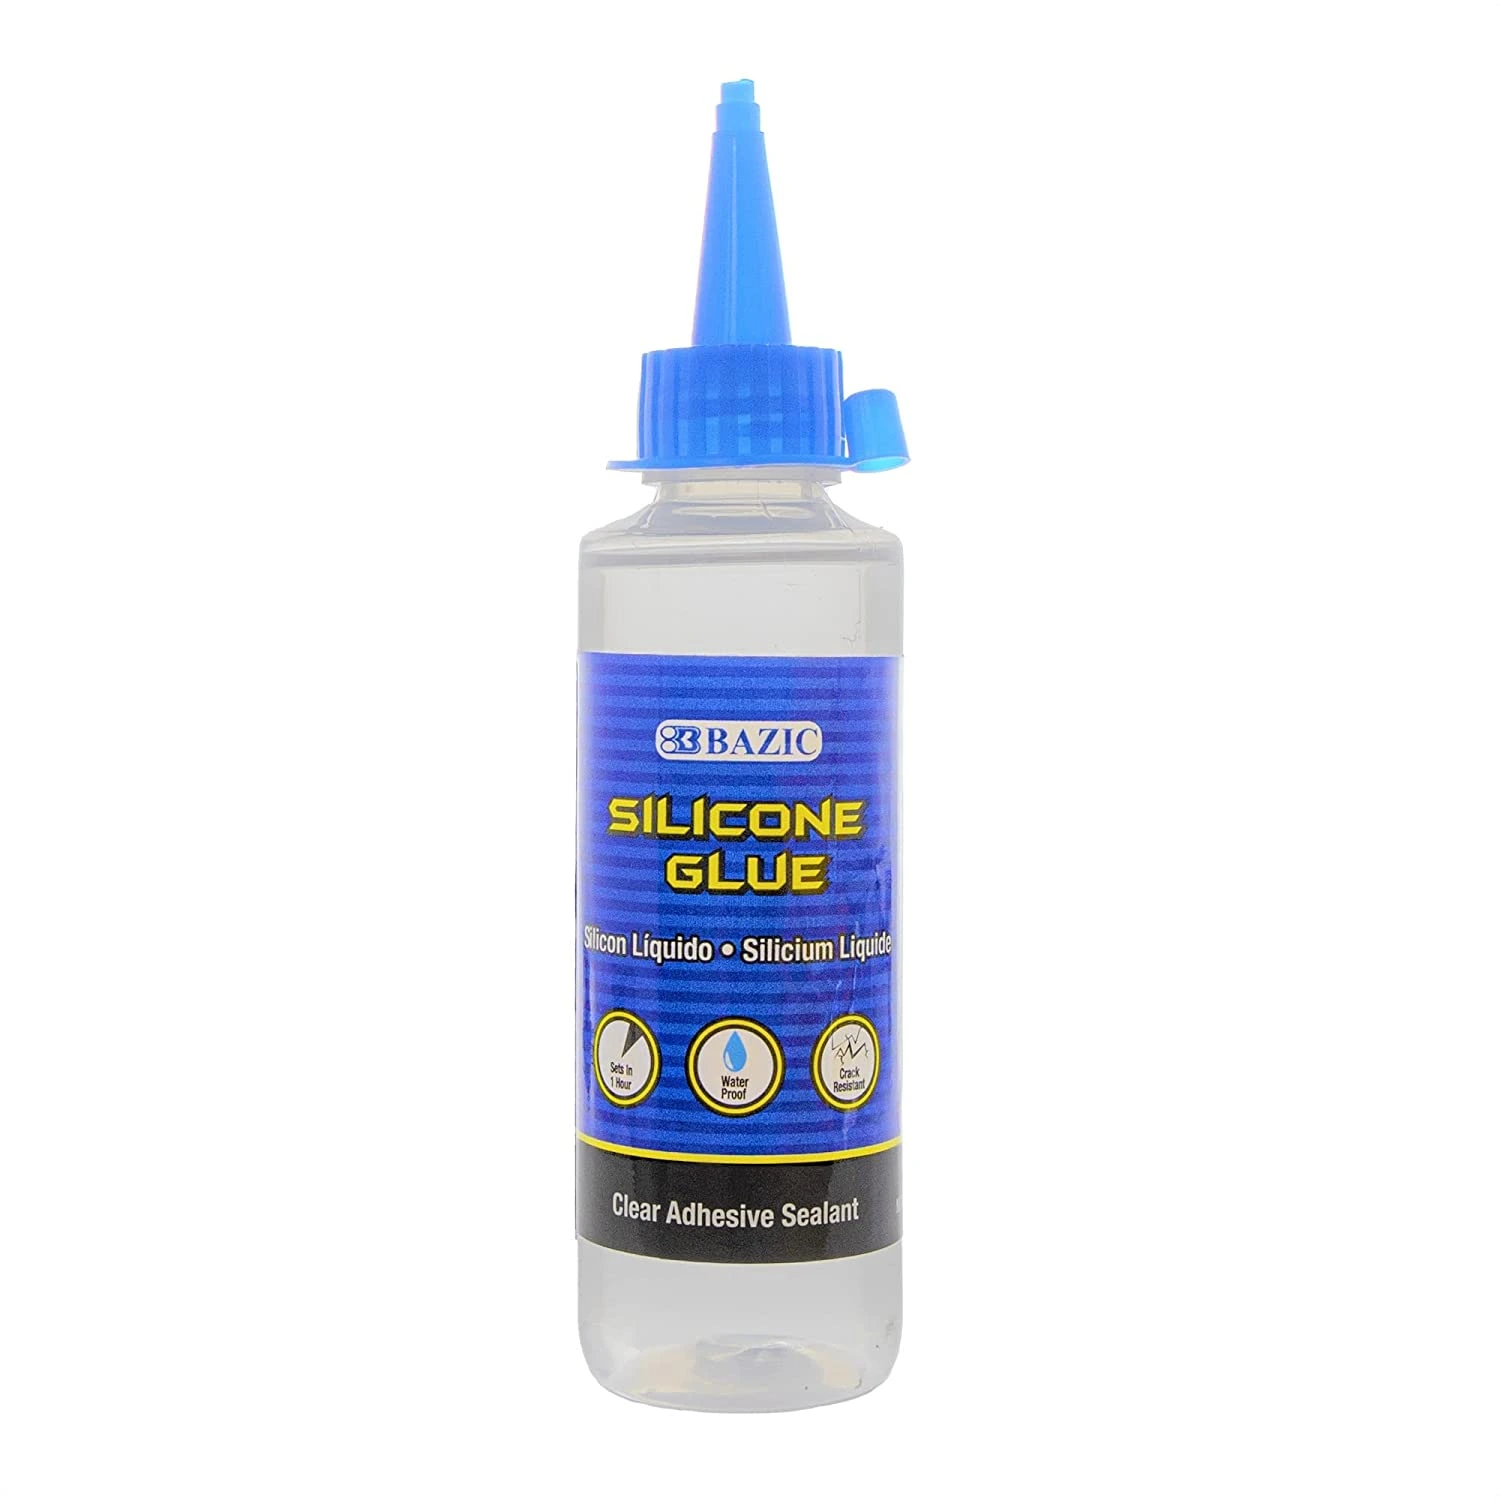 Contact Cement Adhesive 1 FL OZ (30 mL) - The CEO Creative